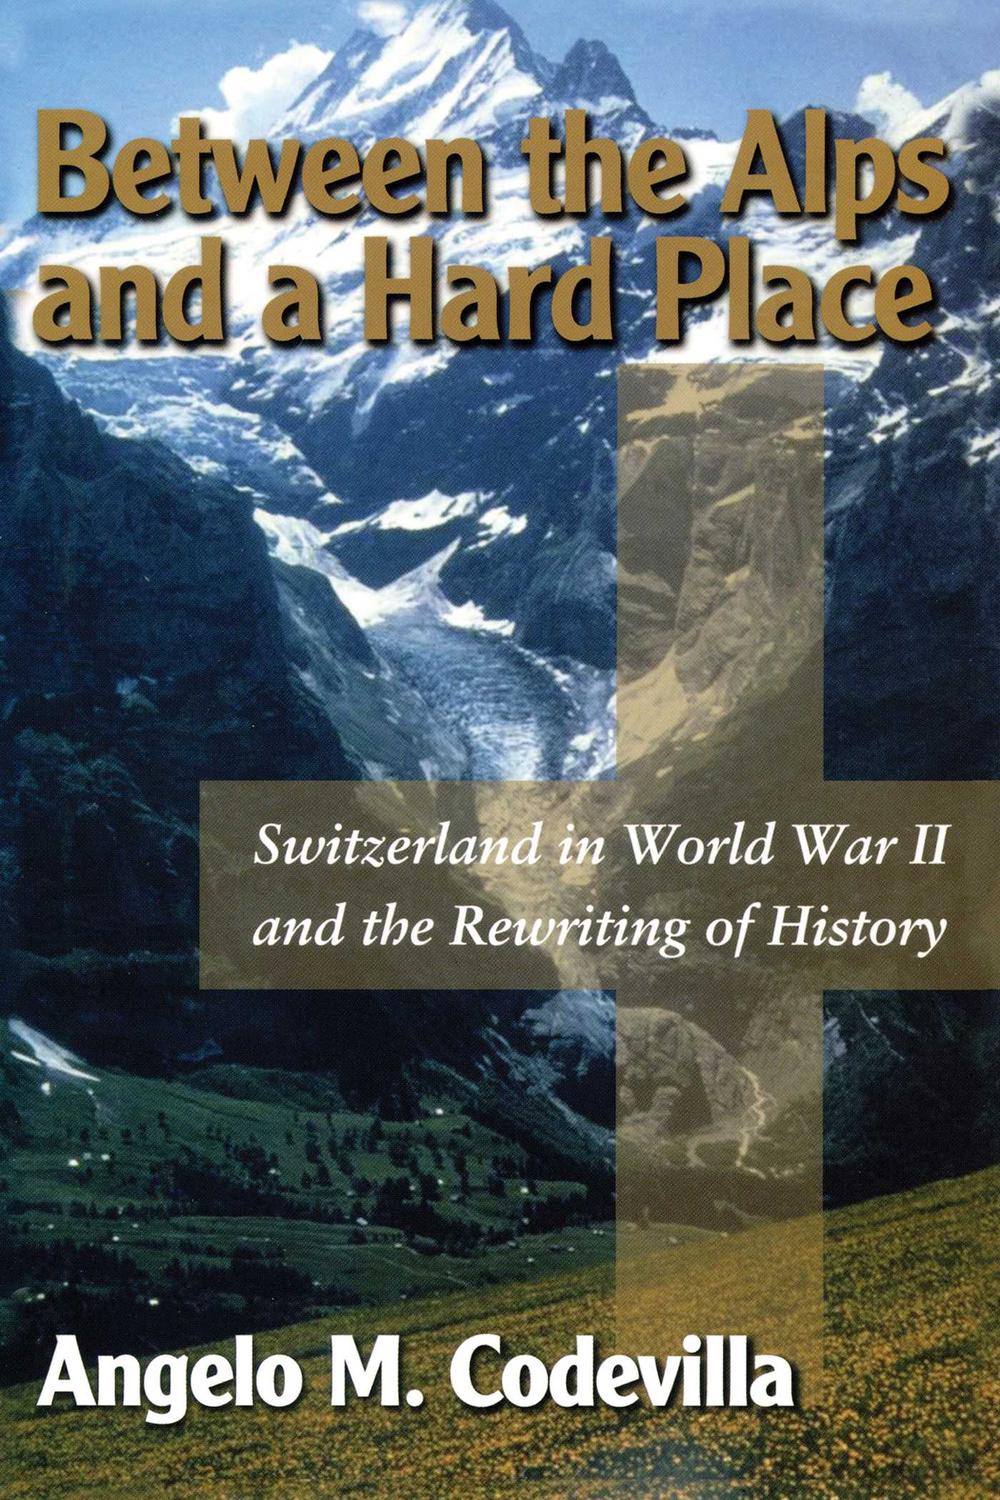 Between the Alps and a Hard Place - Angelo M. Codevilla